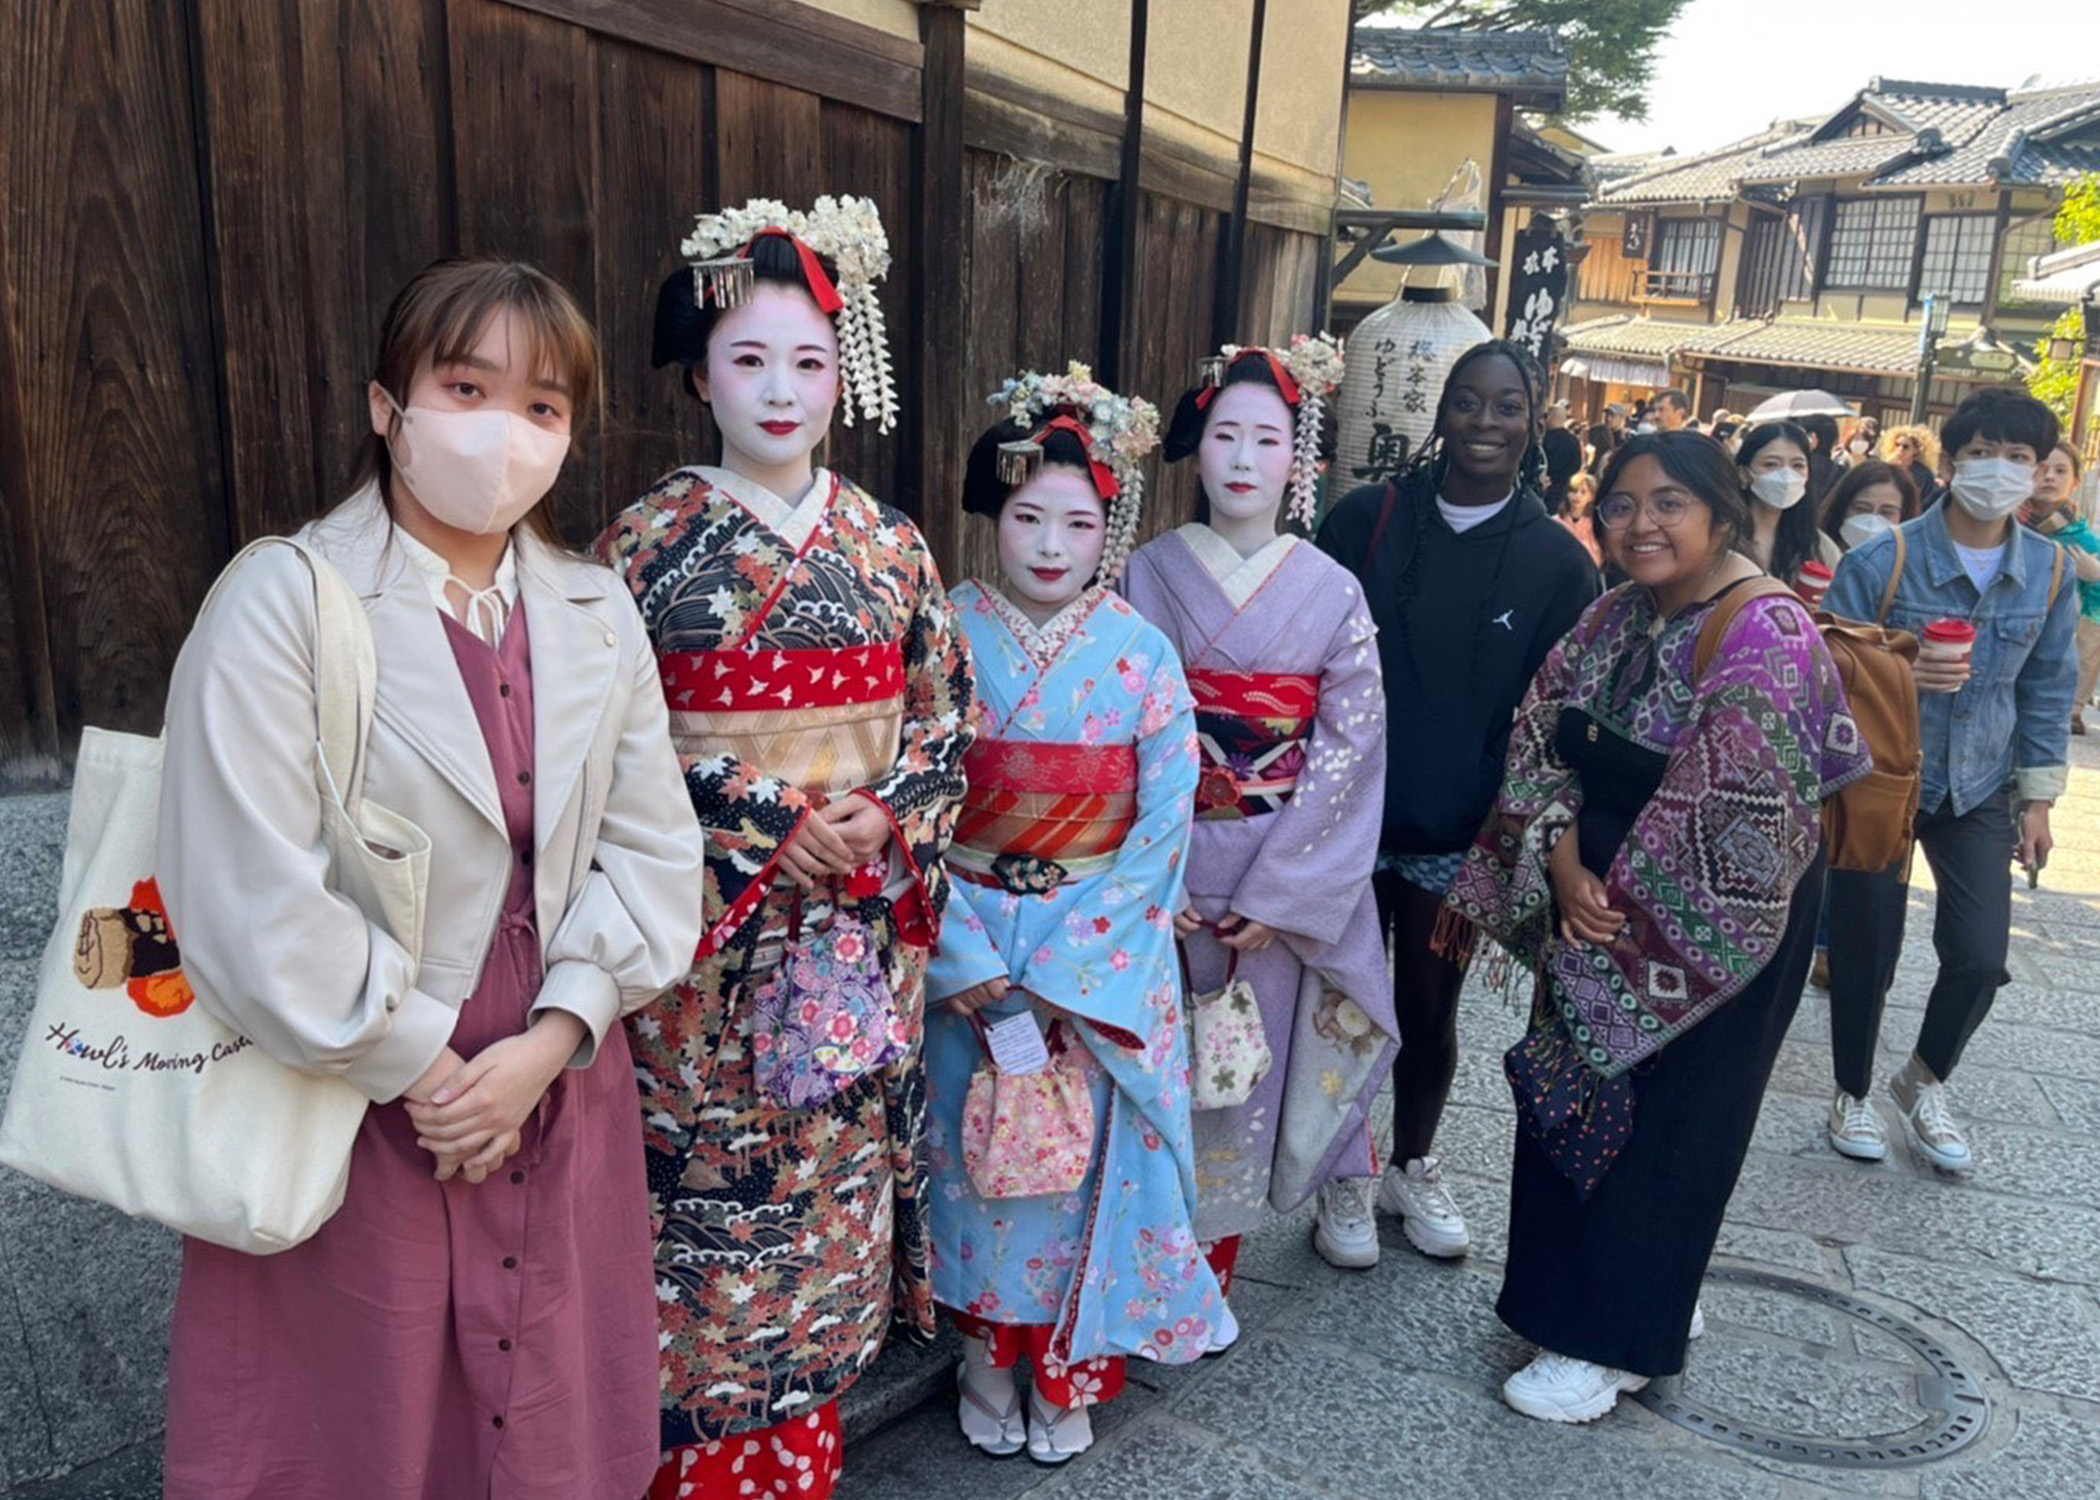 Young tourists pose on a sidewalk with Asian women in traditional dress.